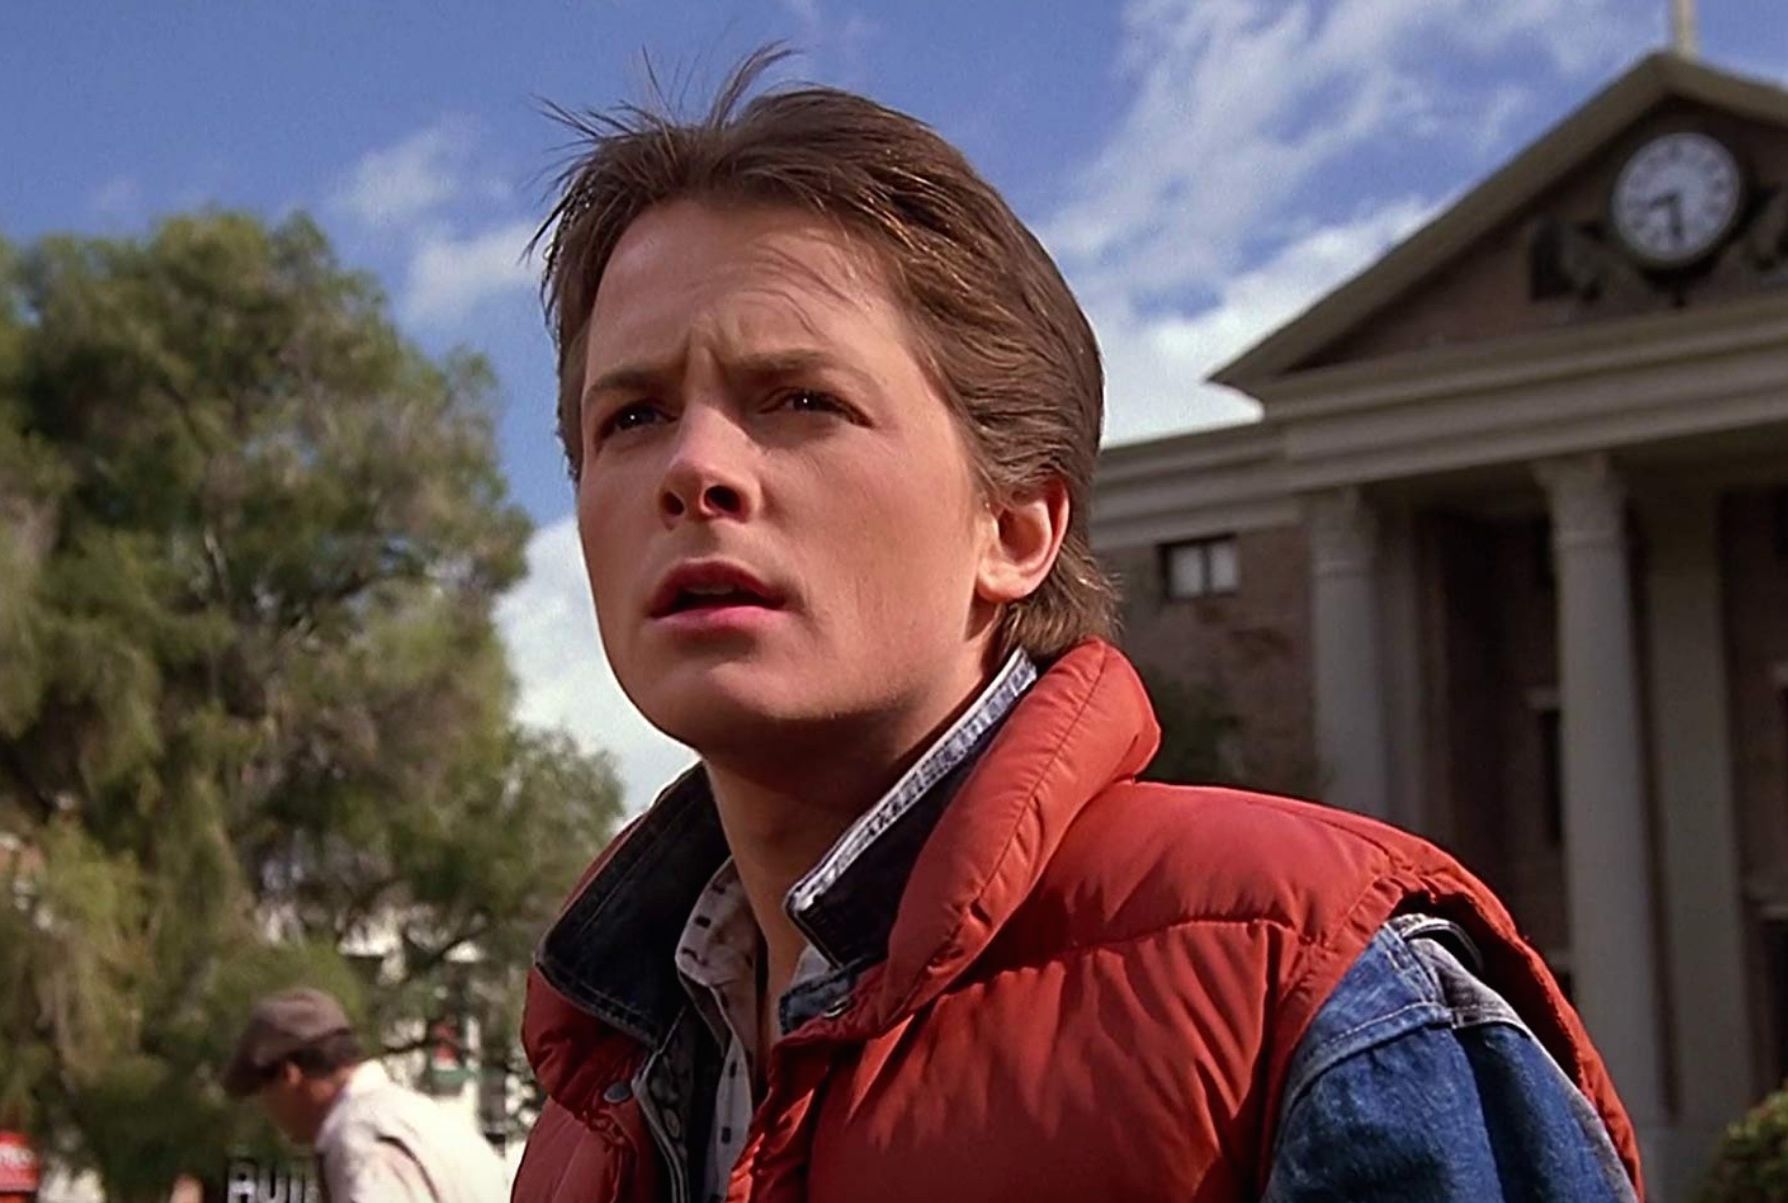 Things to Look for the Next Time You Watch Back to the Future